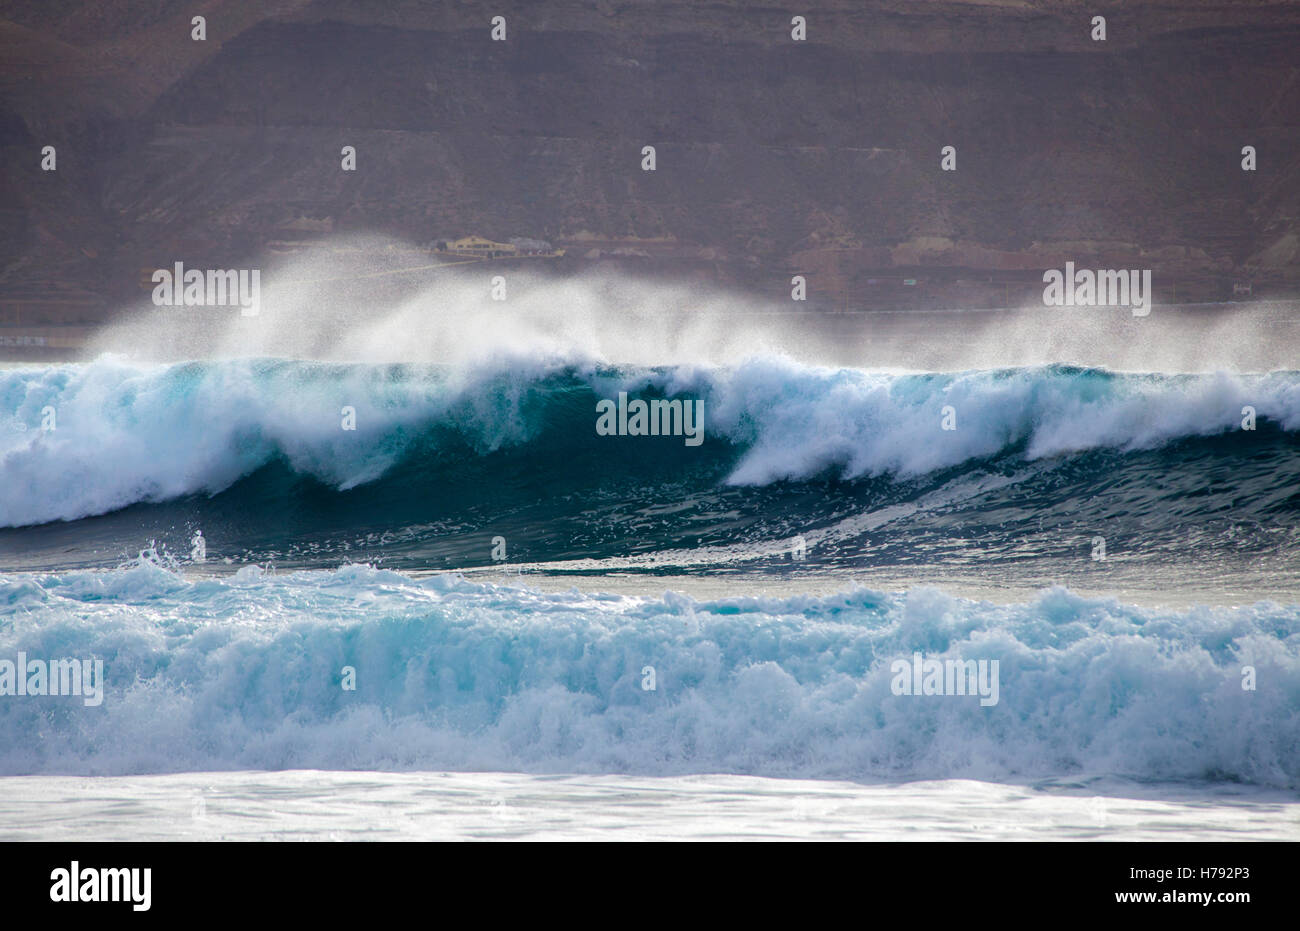 ocean wave breaking by Confital beach, north East of Gran Canaria, October 2016 Stock Photo